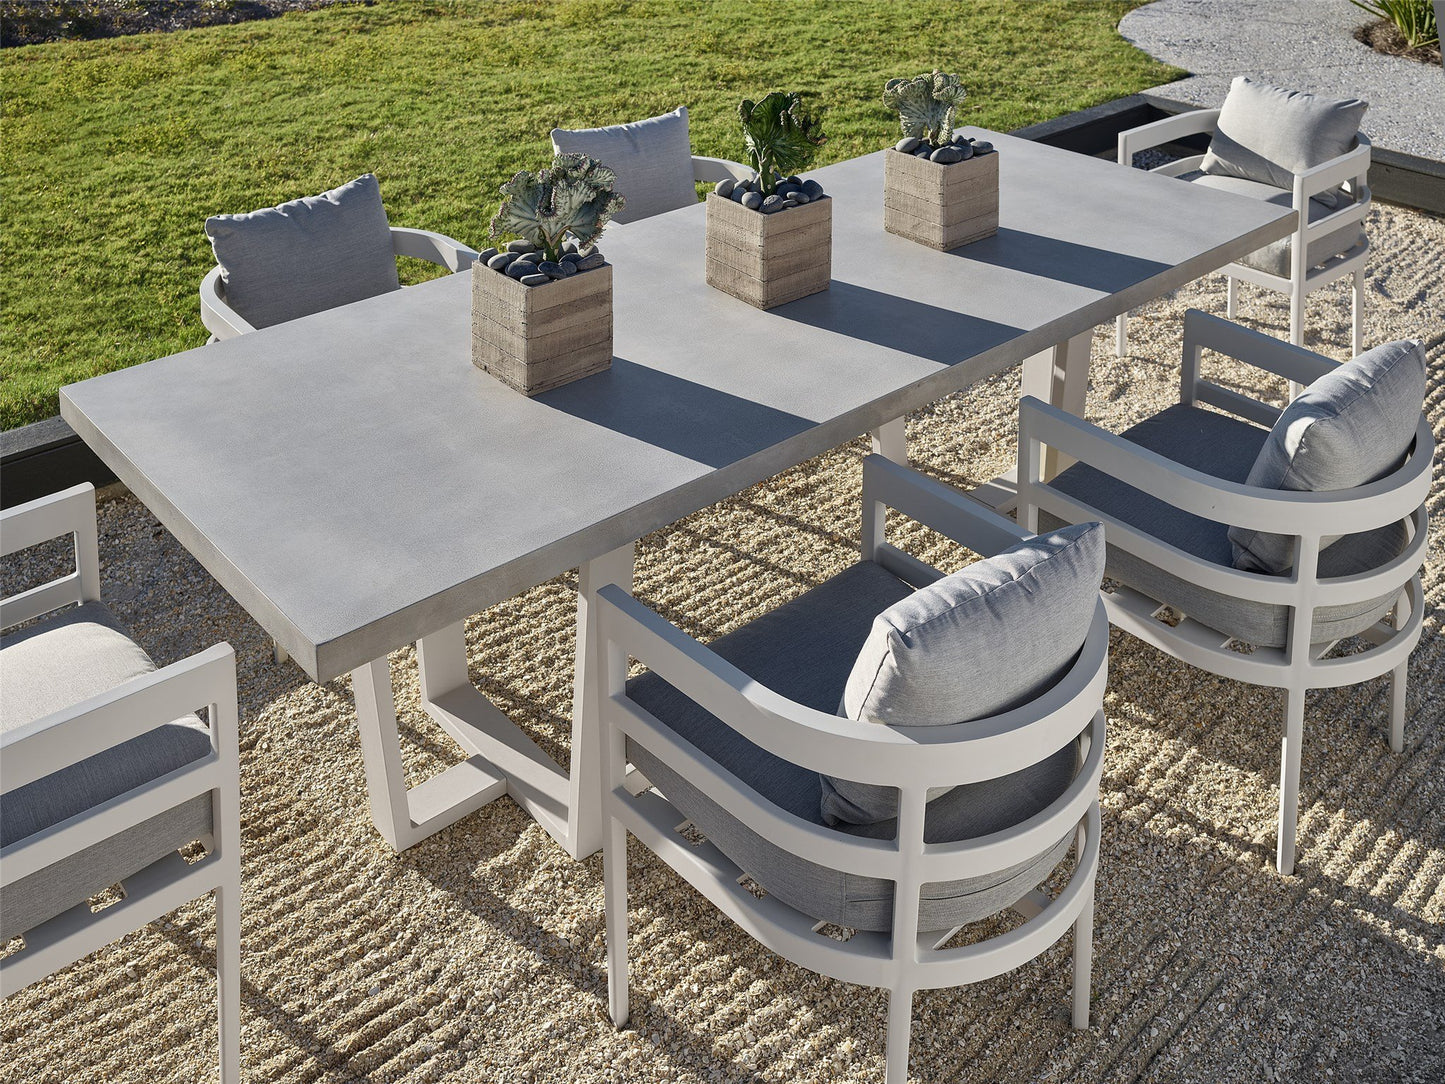 UNIVERSAL - COASTAL LIVING OUTDOOR SOUTH BEACH DINING TABLE